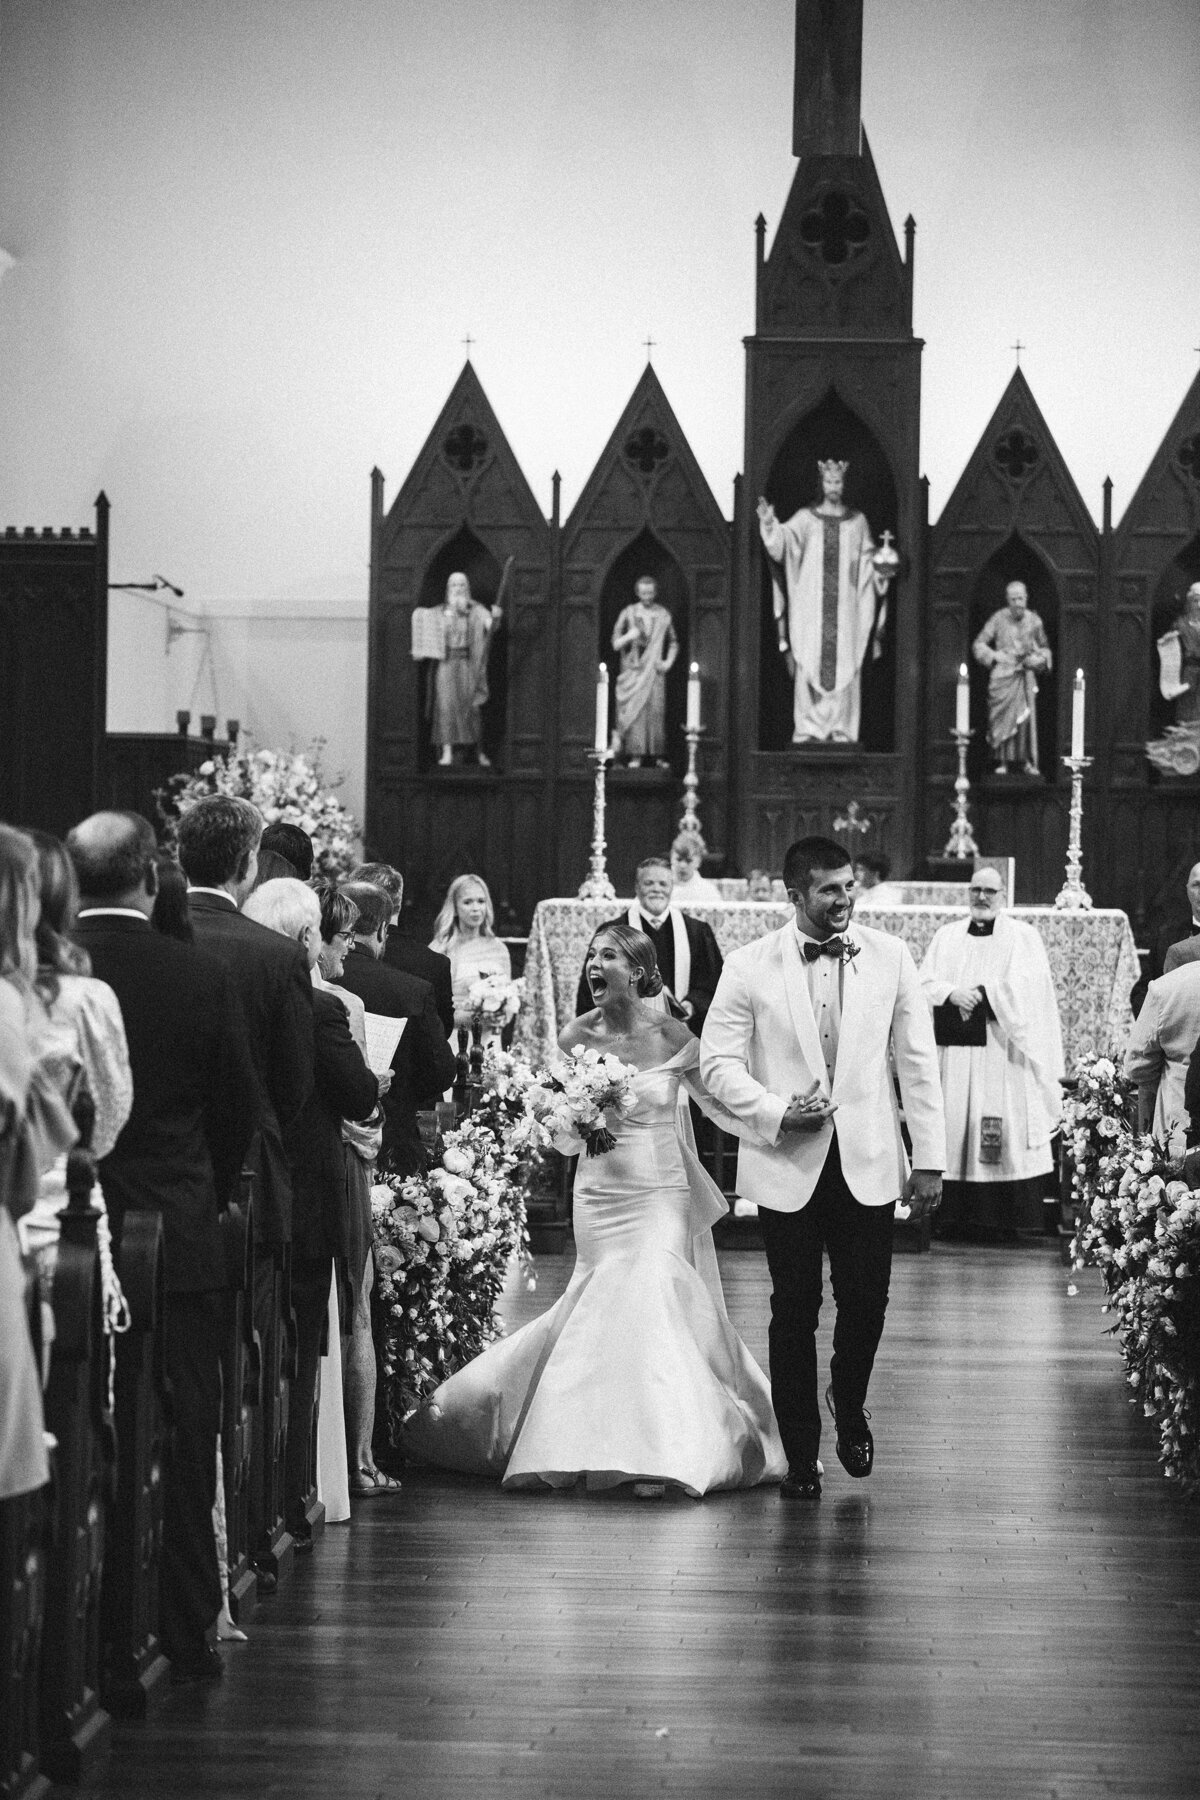 Wedding ceremony at St. Peters Anglican Church in Tallahassee FL - 5